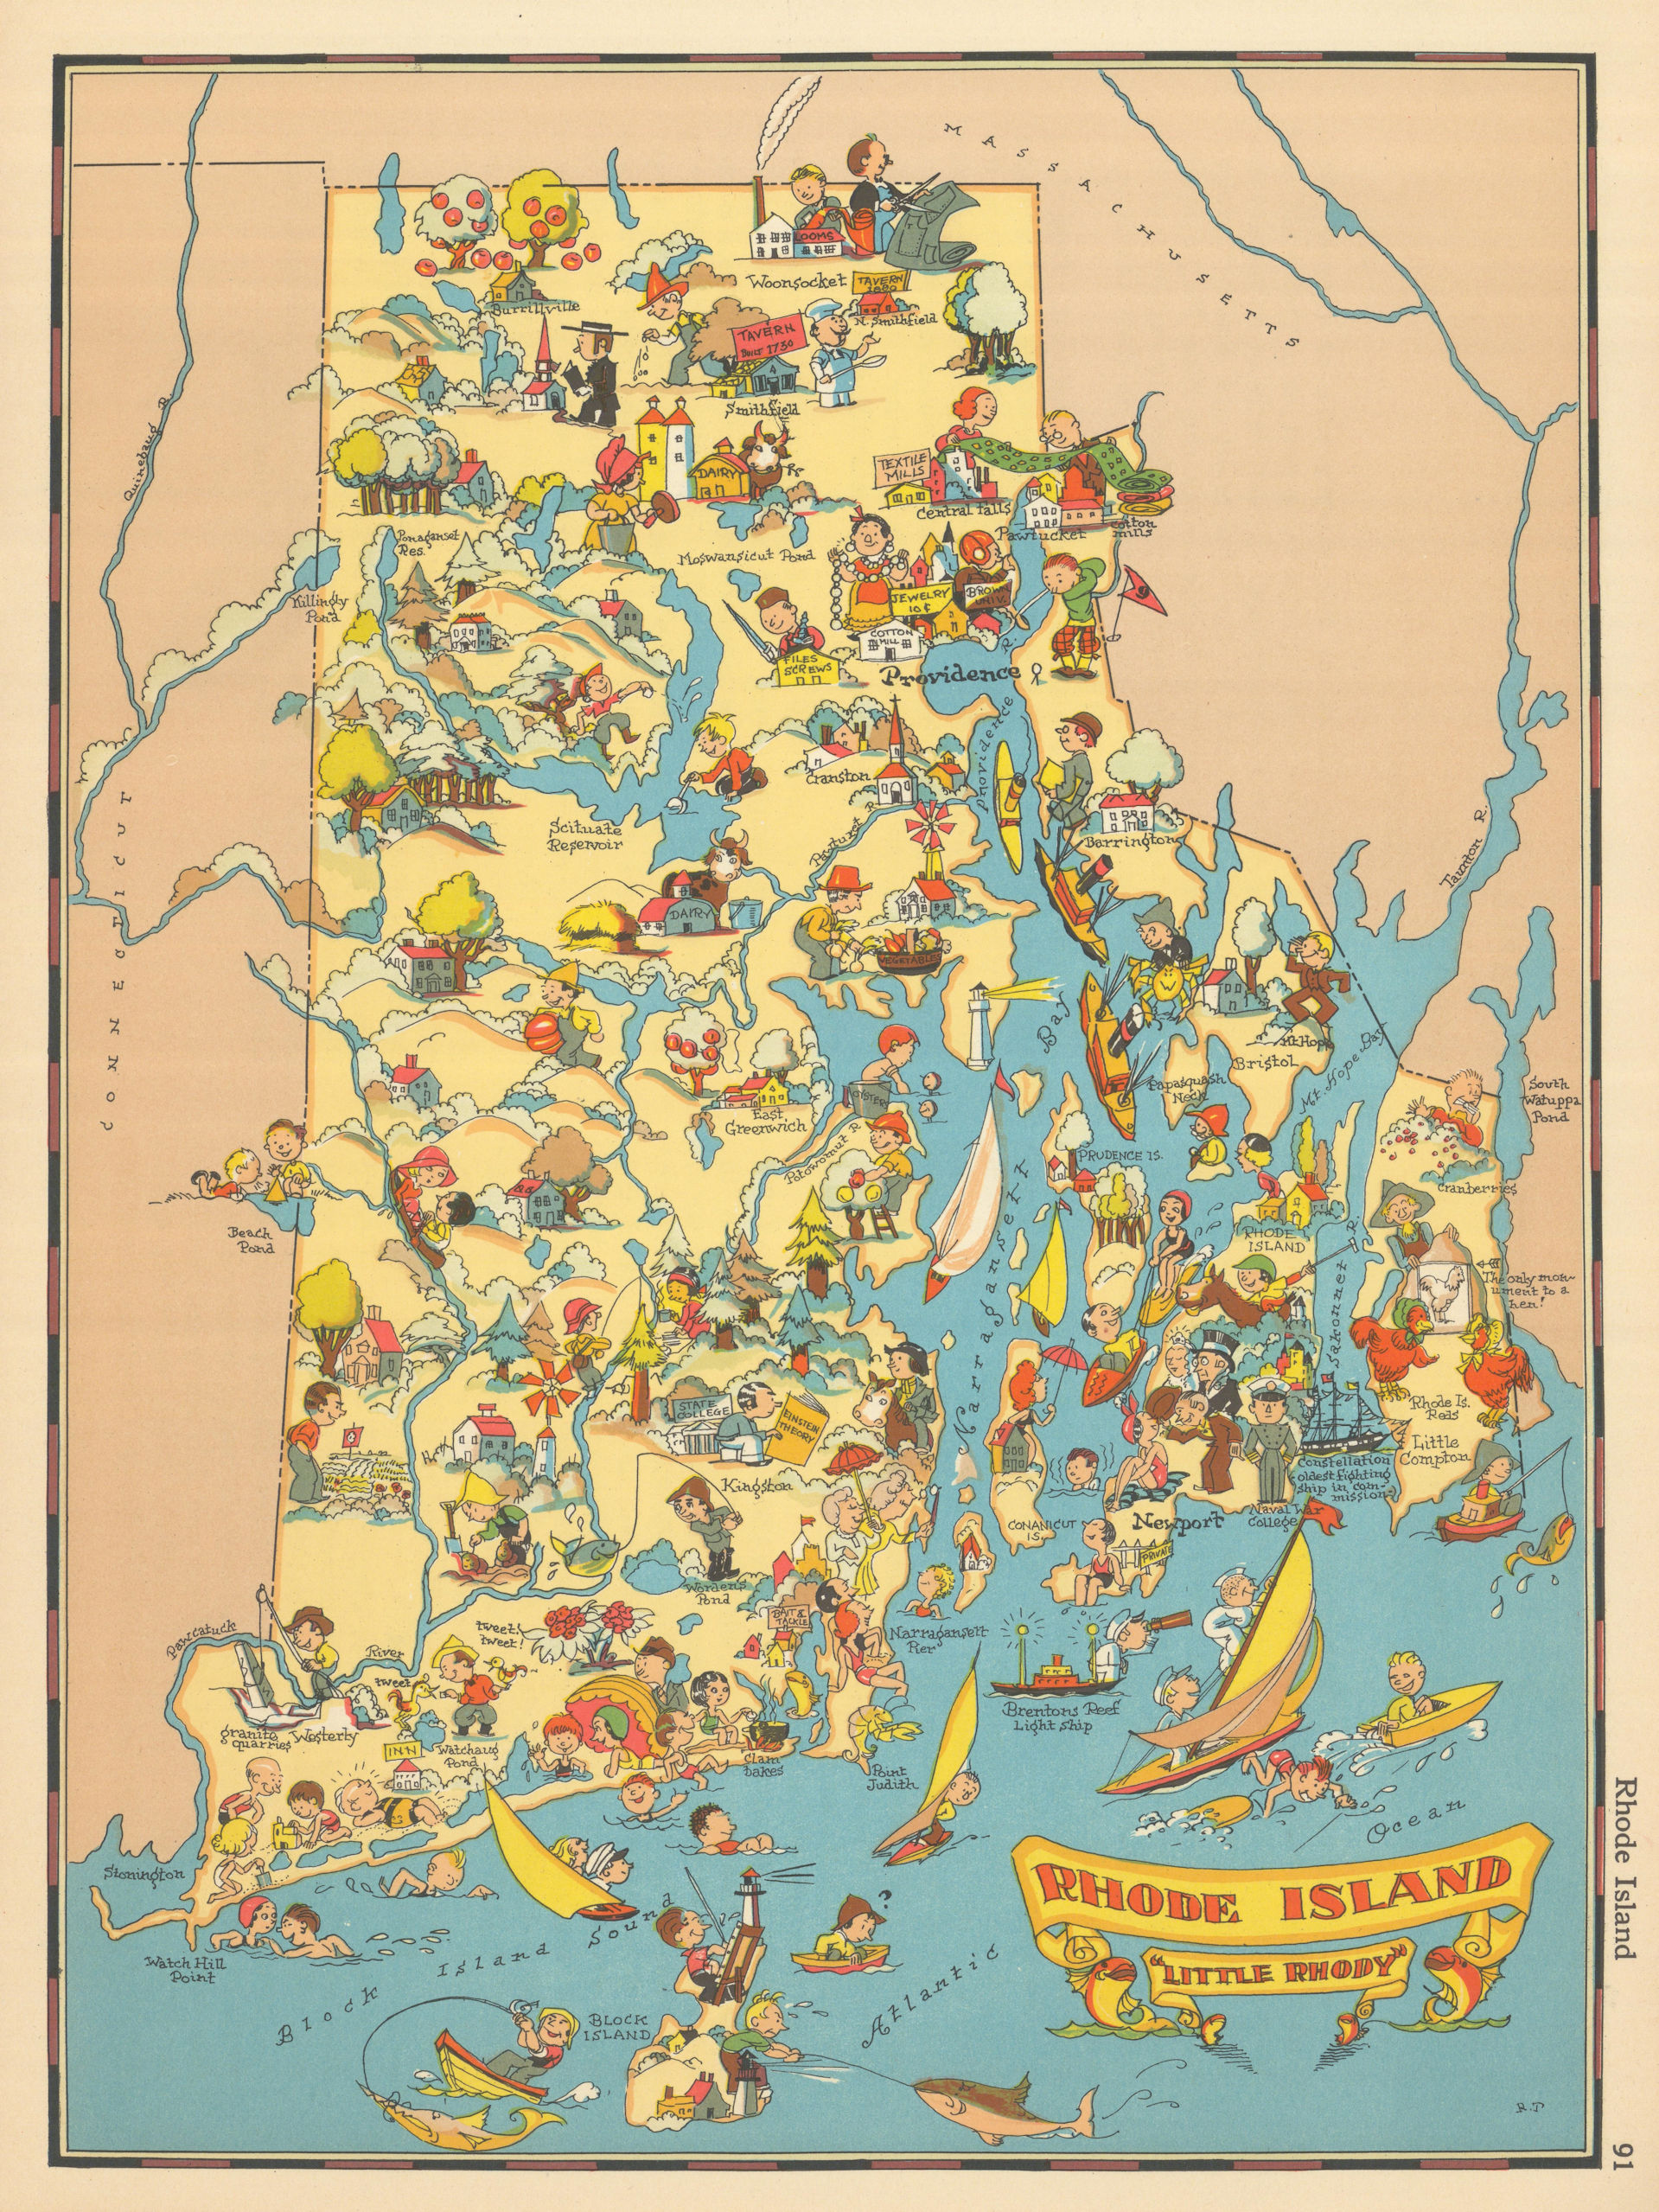 Associate Product Rhode Island "Little Rhody". Pictorial state map by Ruth Taylor White 1935